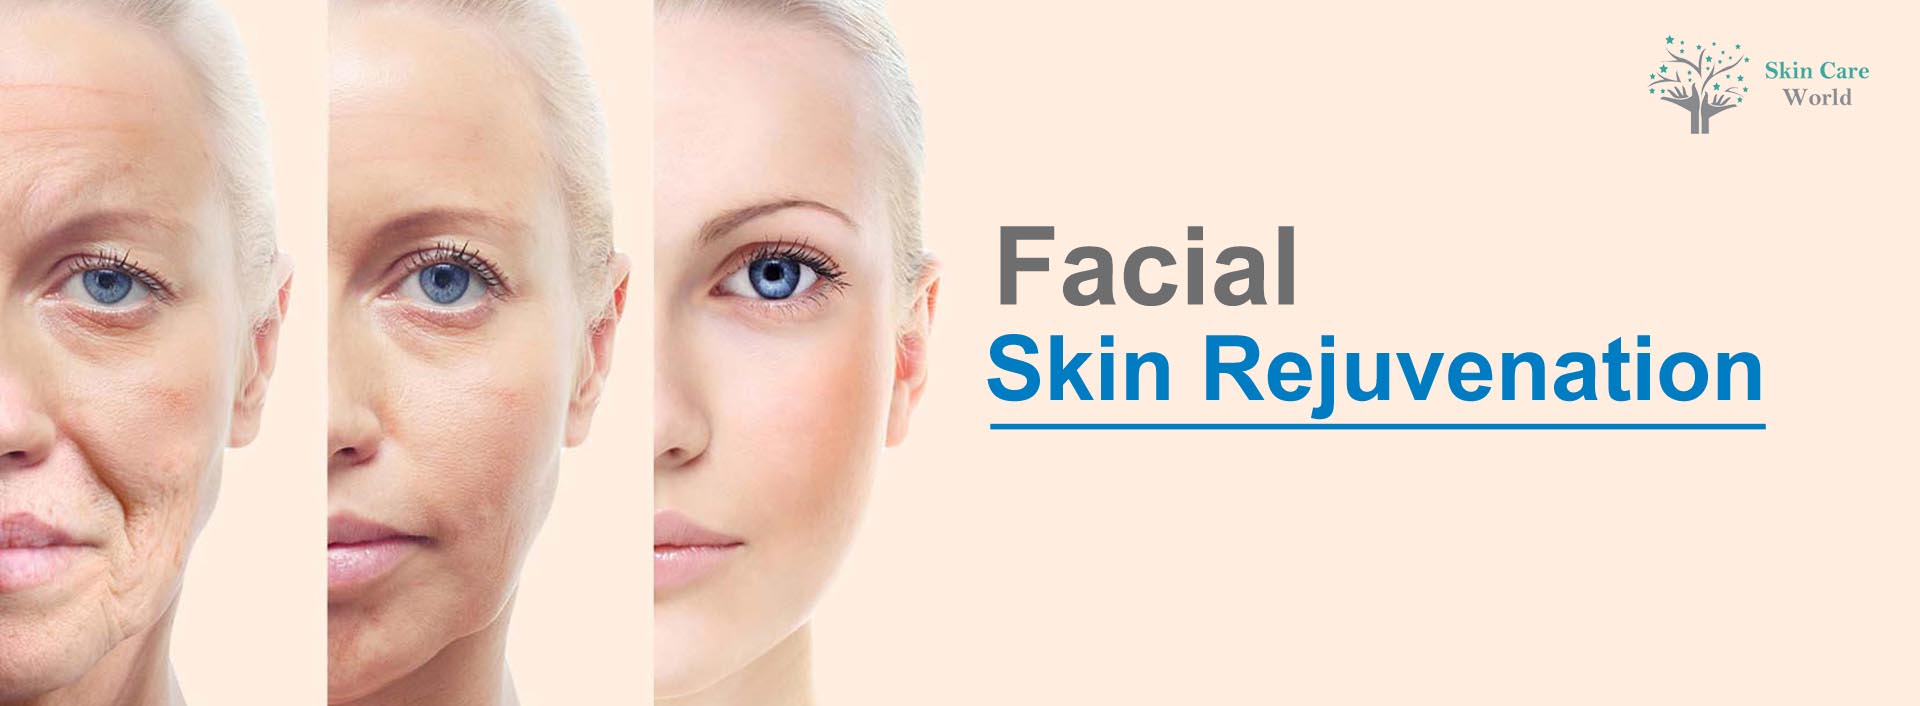 Facial Rejuvenation And Skin Brightening Treatment Clinic Near Gurgaon At Affordable Cost